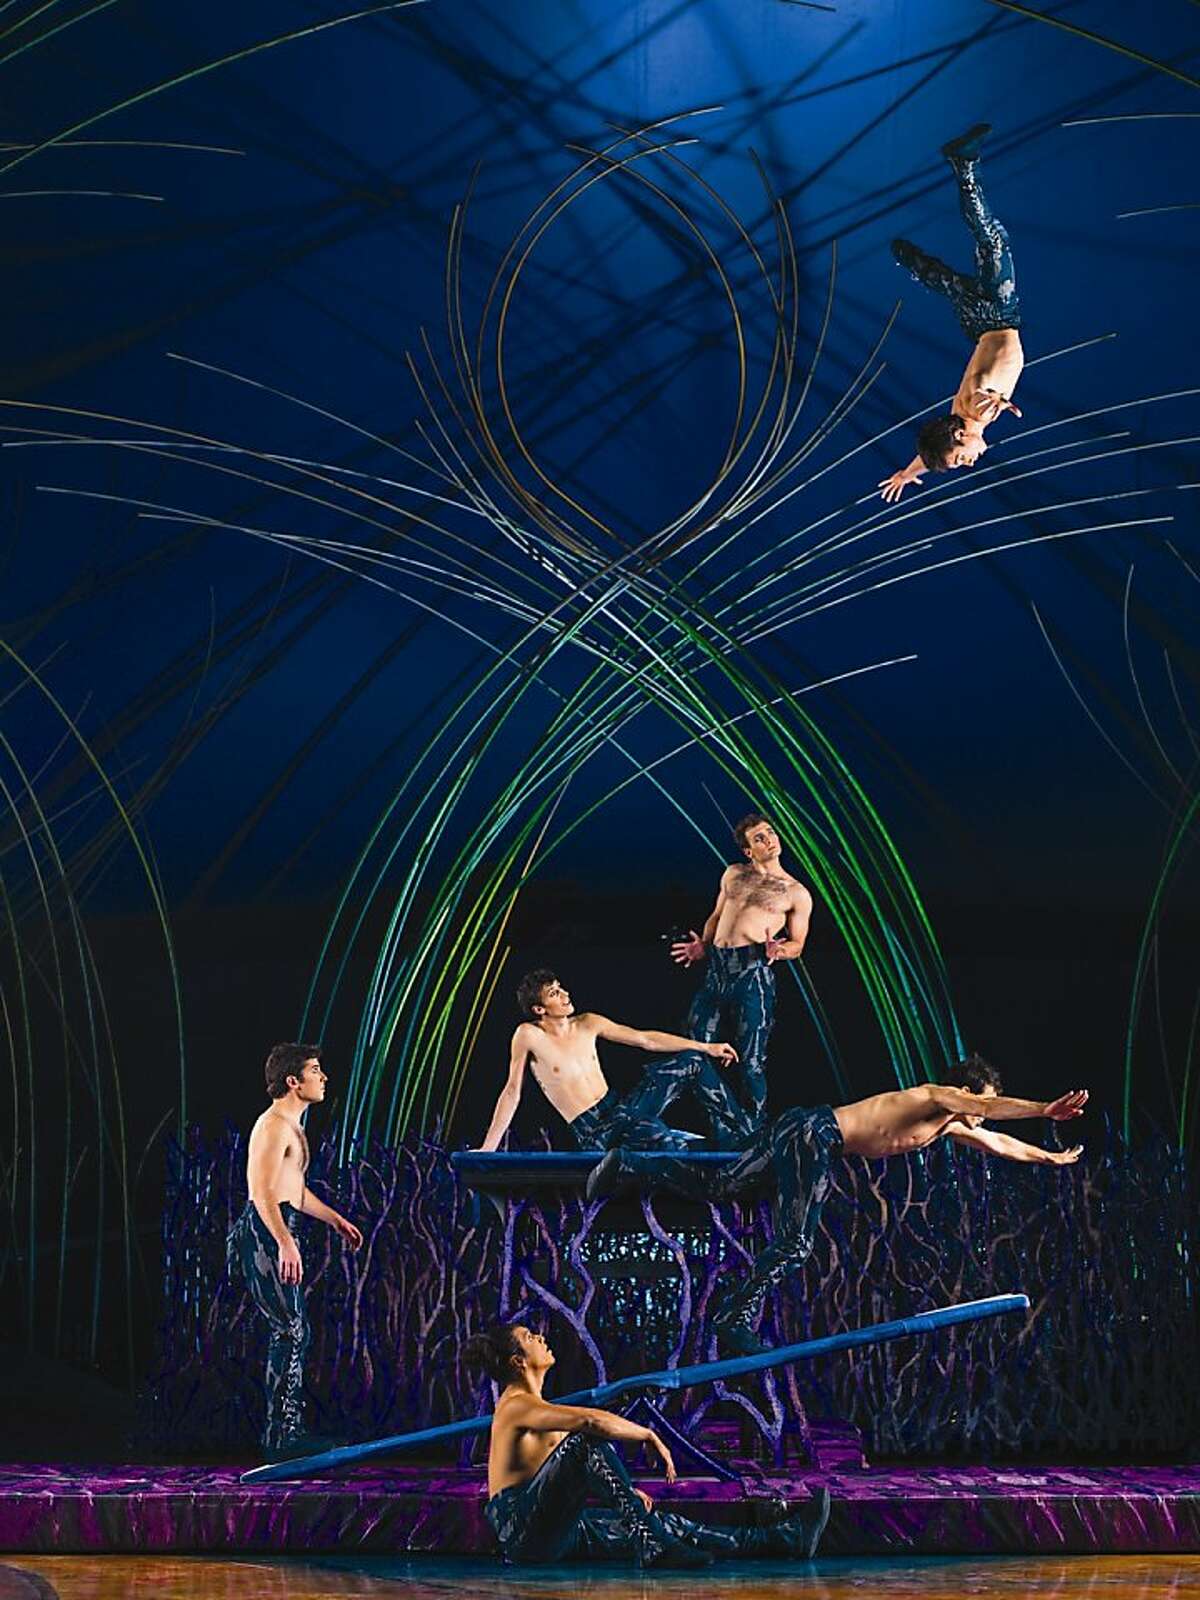 The teeterboard act (escaping from prison) in Cirque du Soleil's "Amaluna"